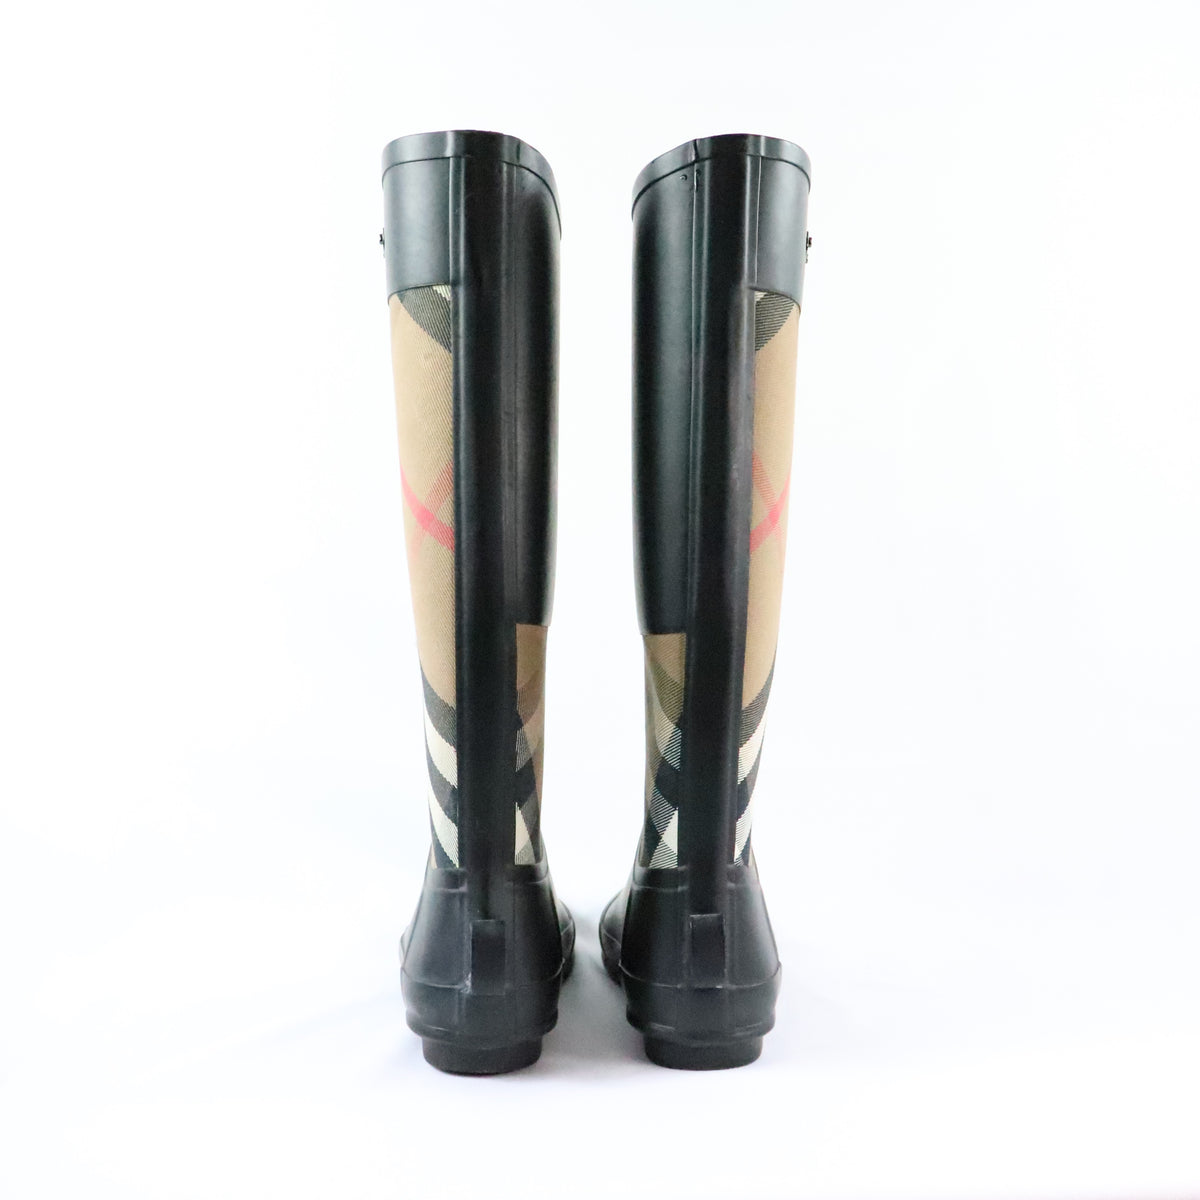 burberry clemence rain boot review